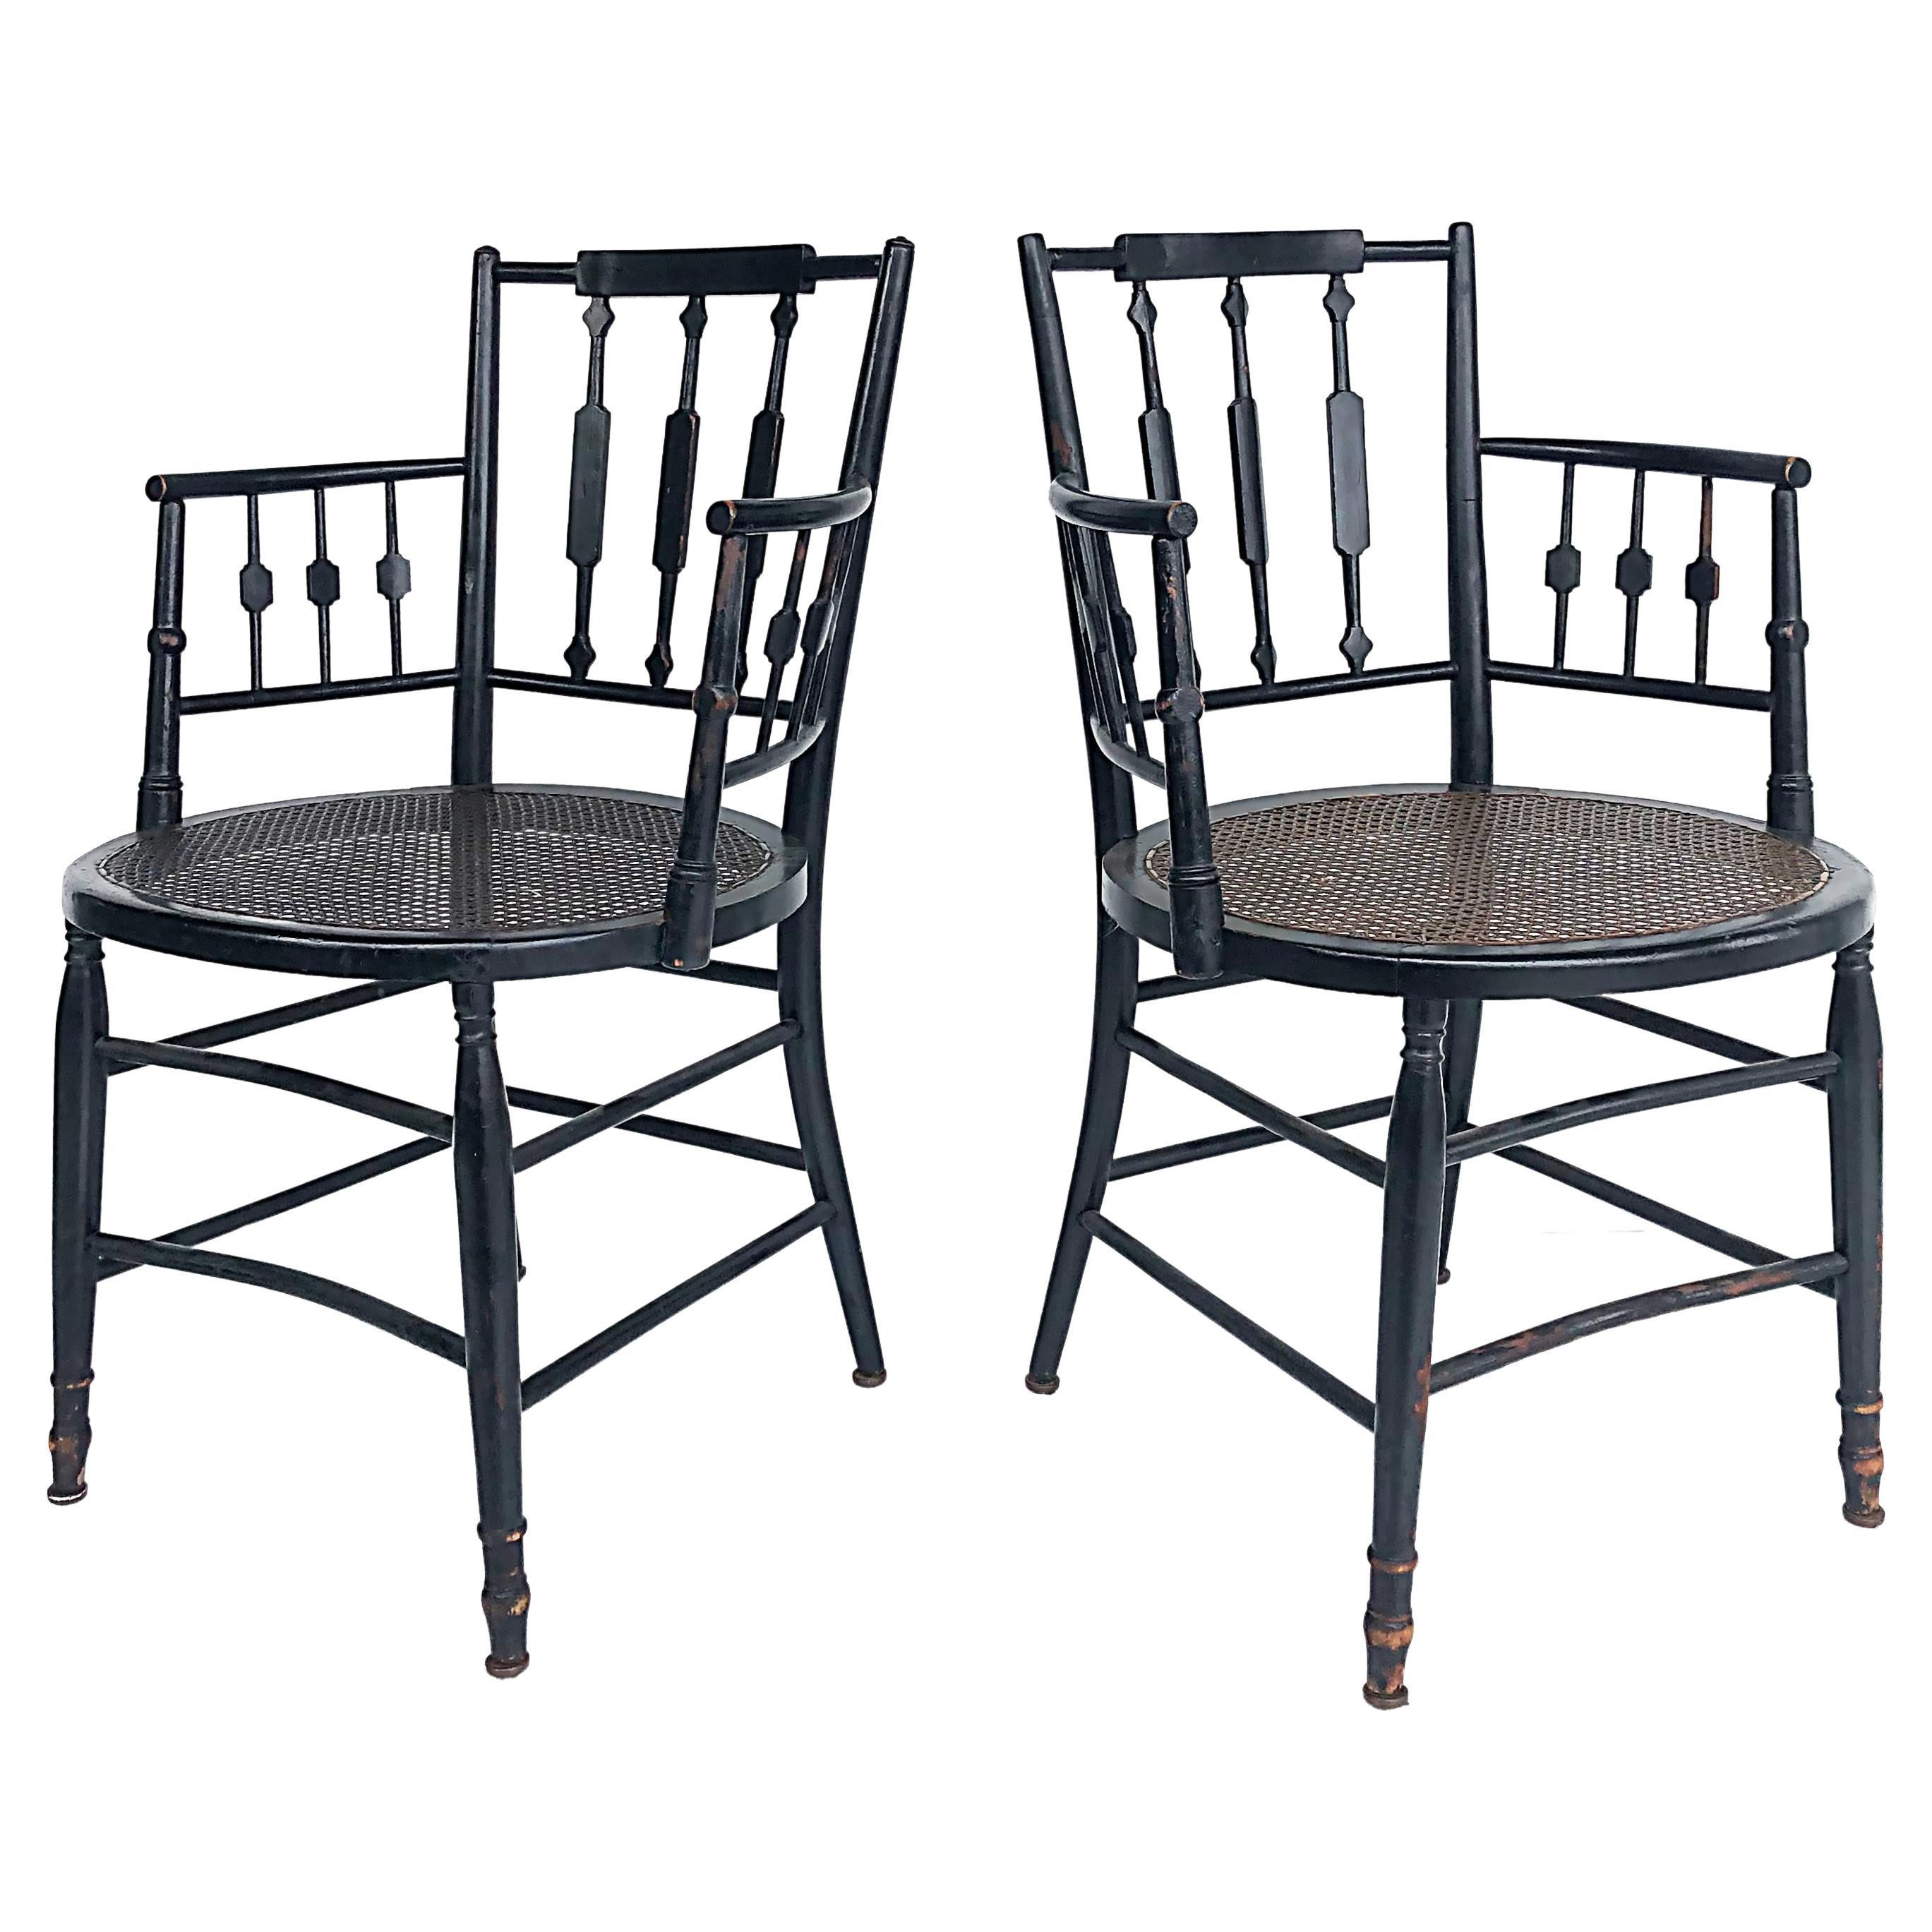 Regency Style Ebonized Arrow-back Slatted Armchairs with Caned Seats, Pair